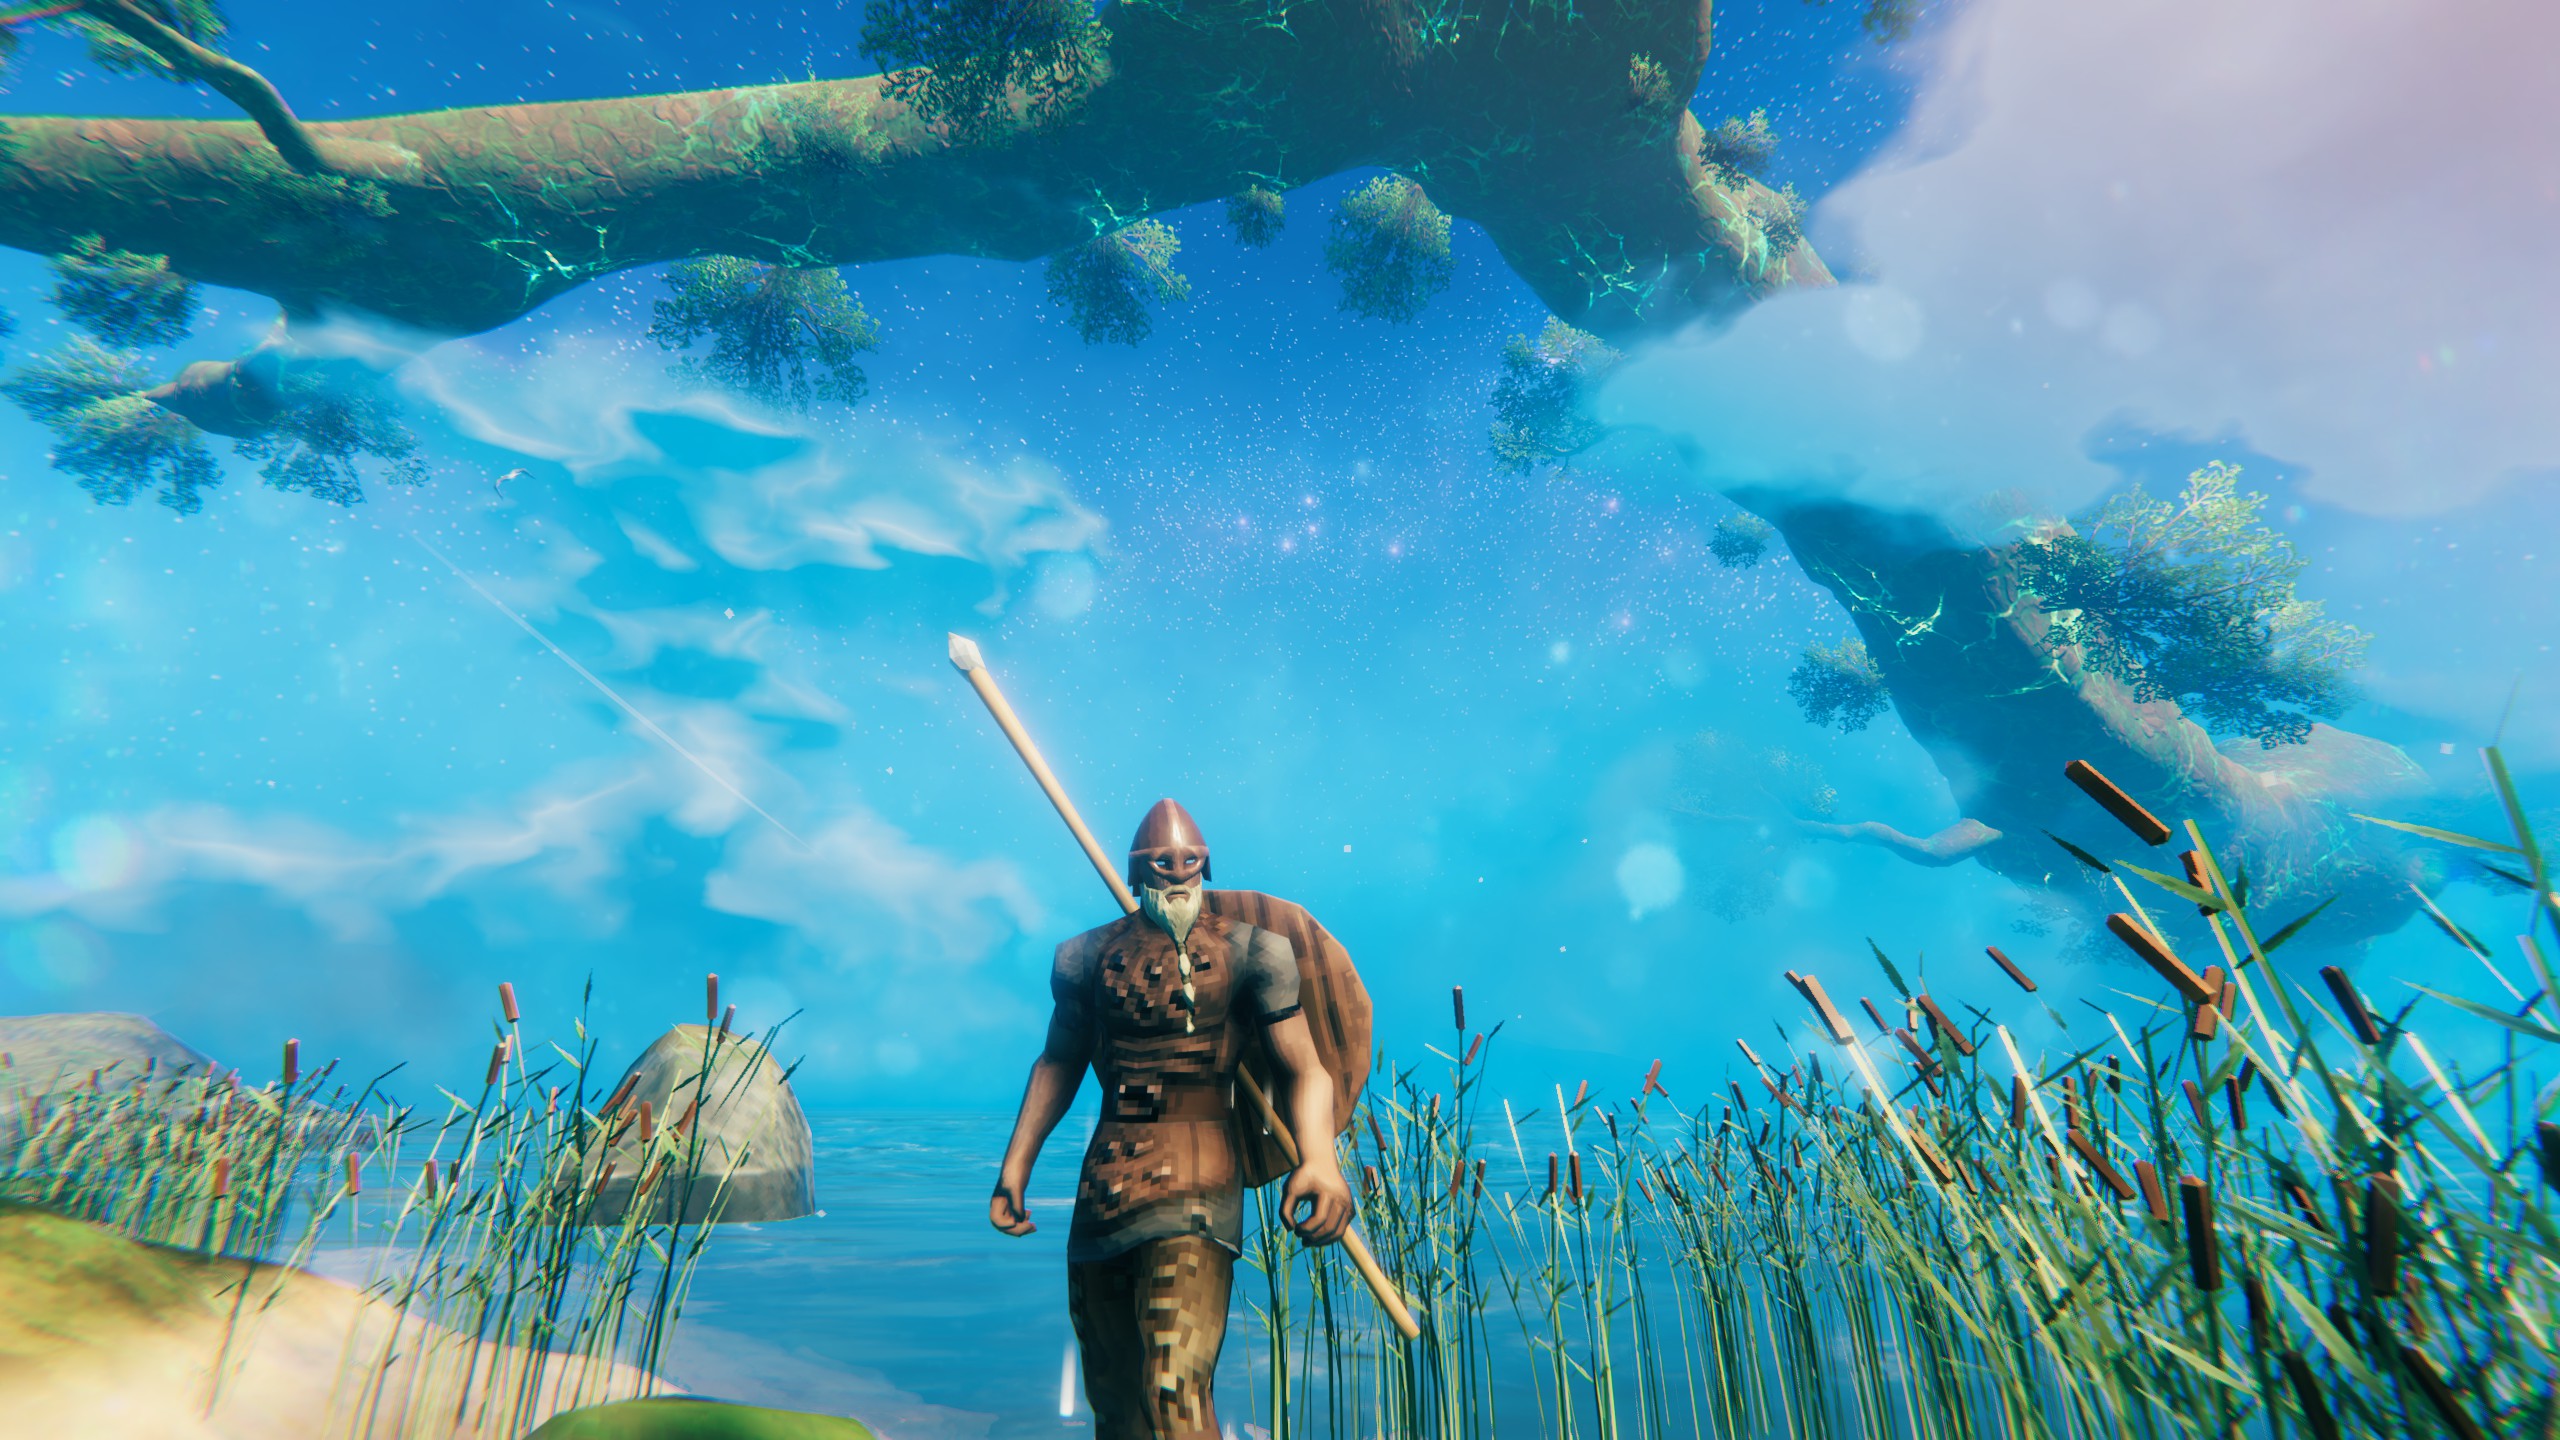 Valheim: 10 tips for starting out in the Viking survival game - EnD# Gaming